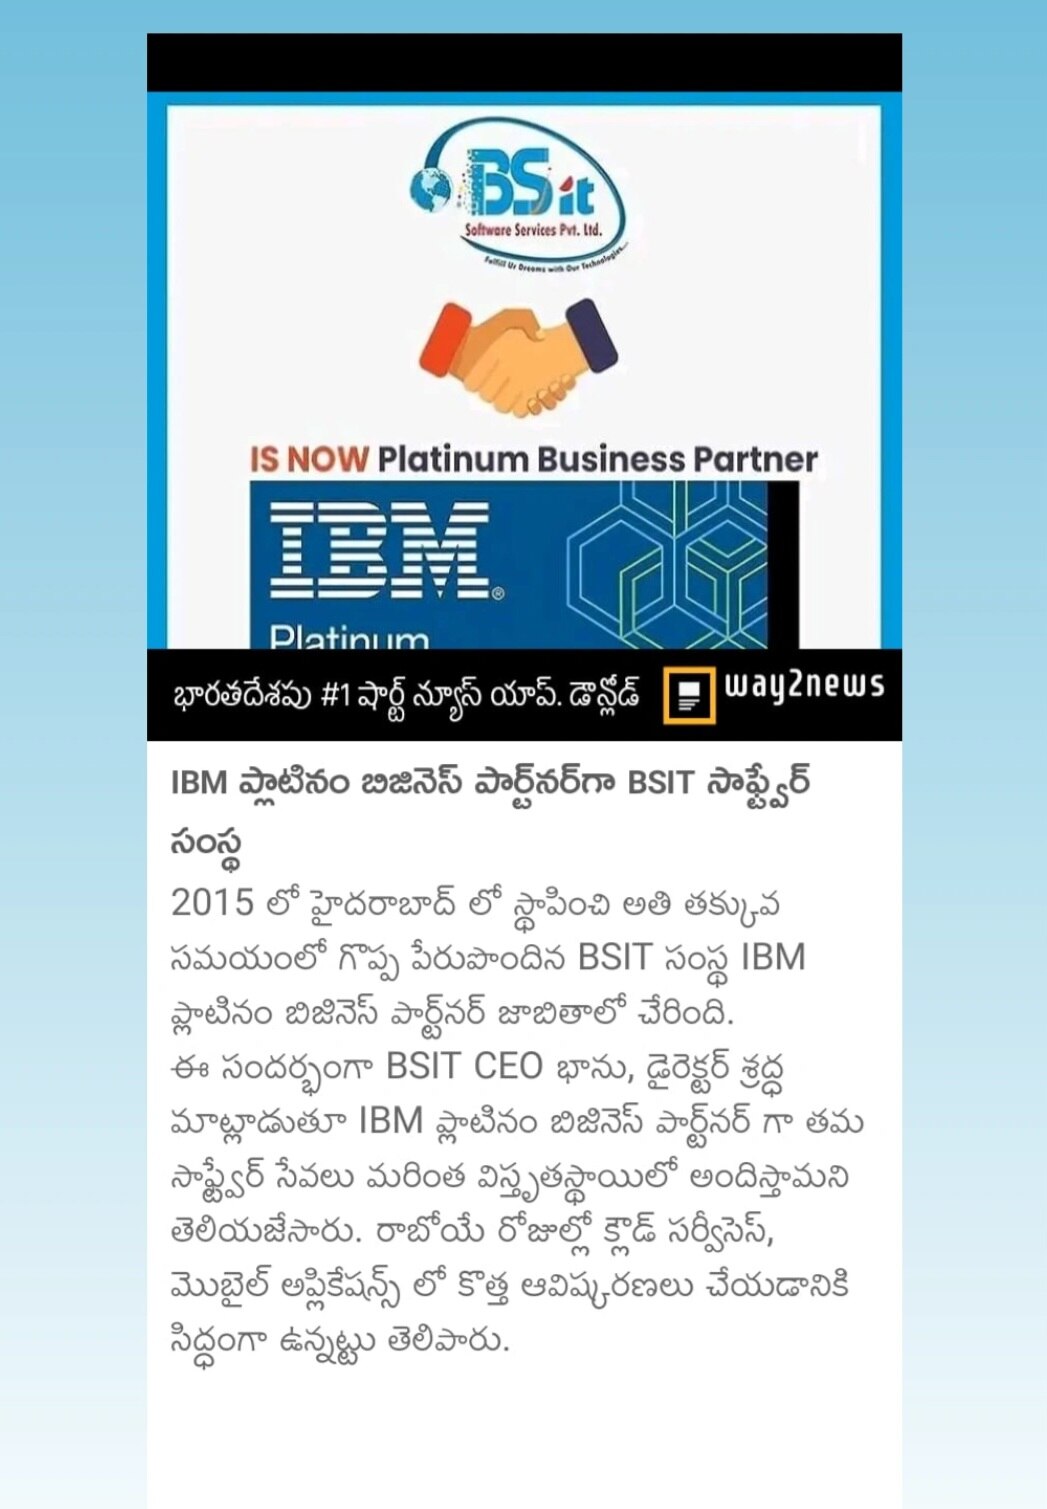 IBM_News_BSIT_Software_Services_Web_And_App_Development_Company_In_India